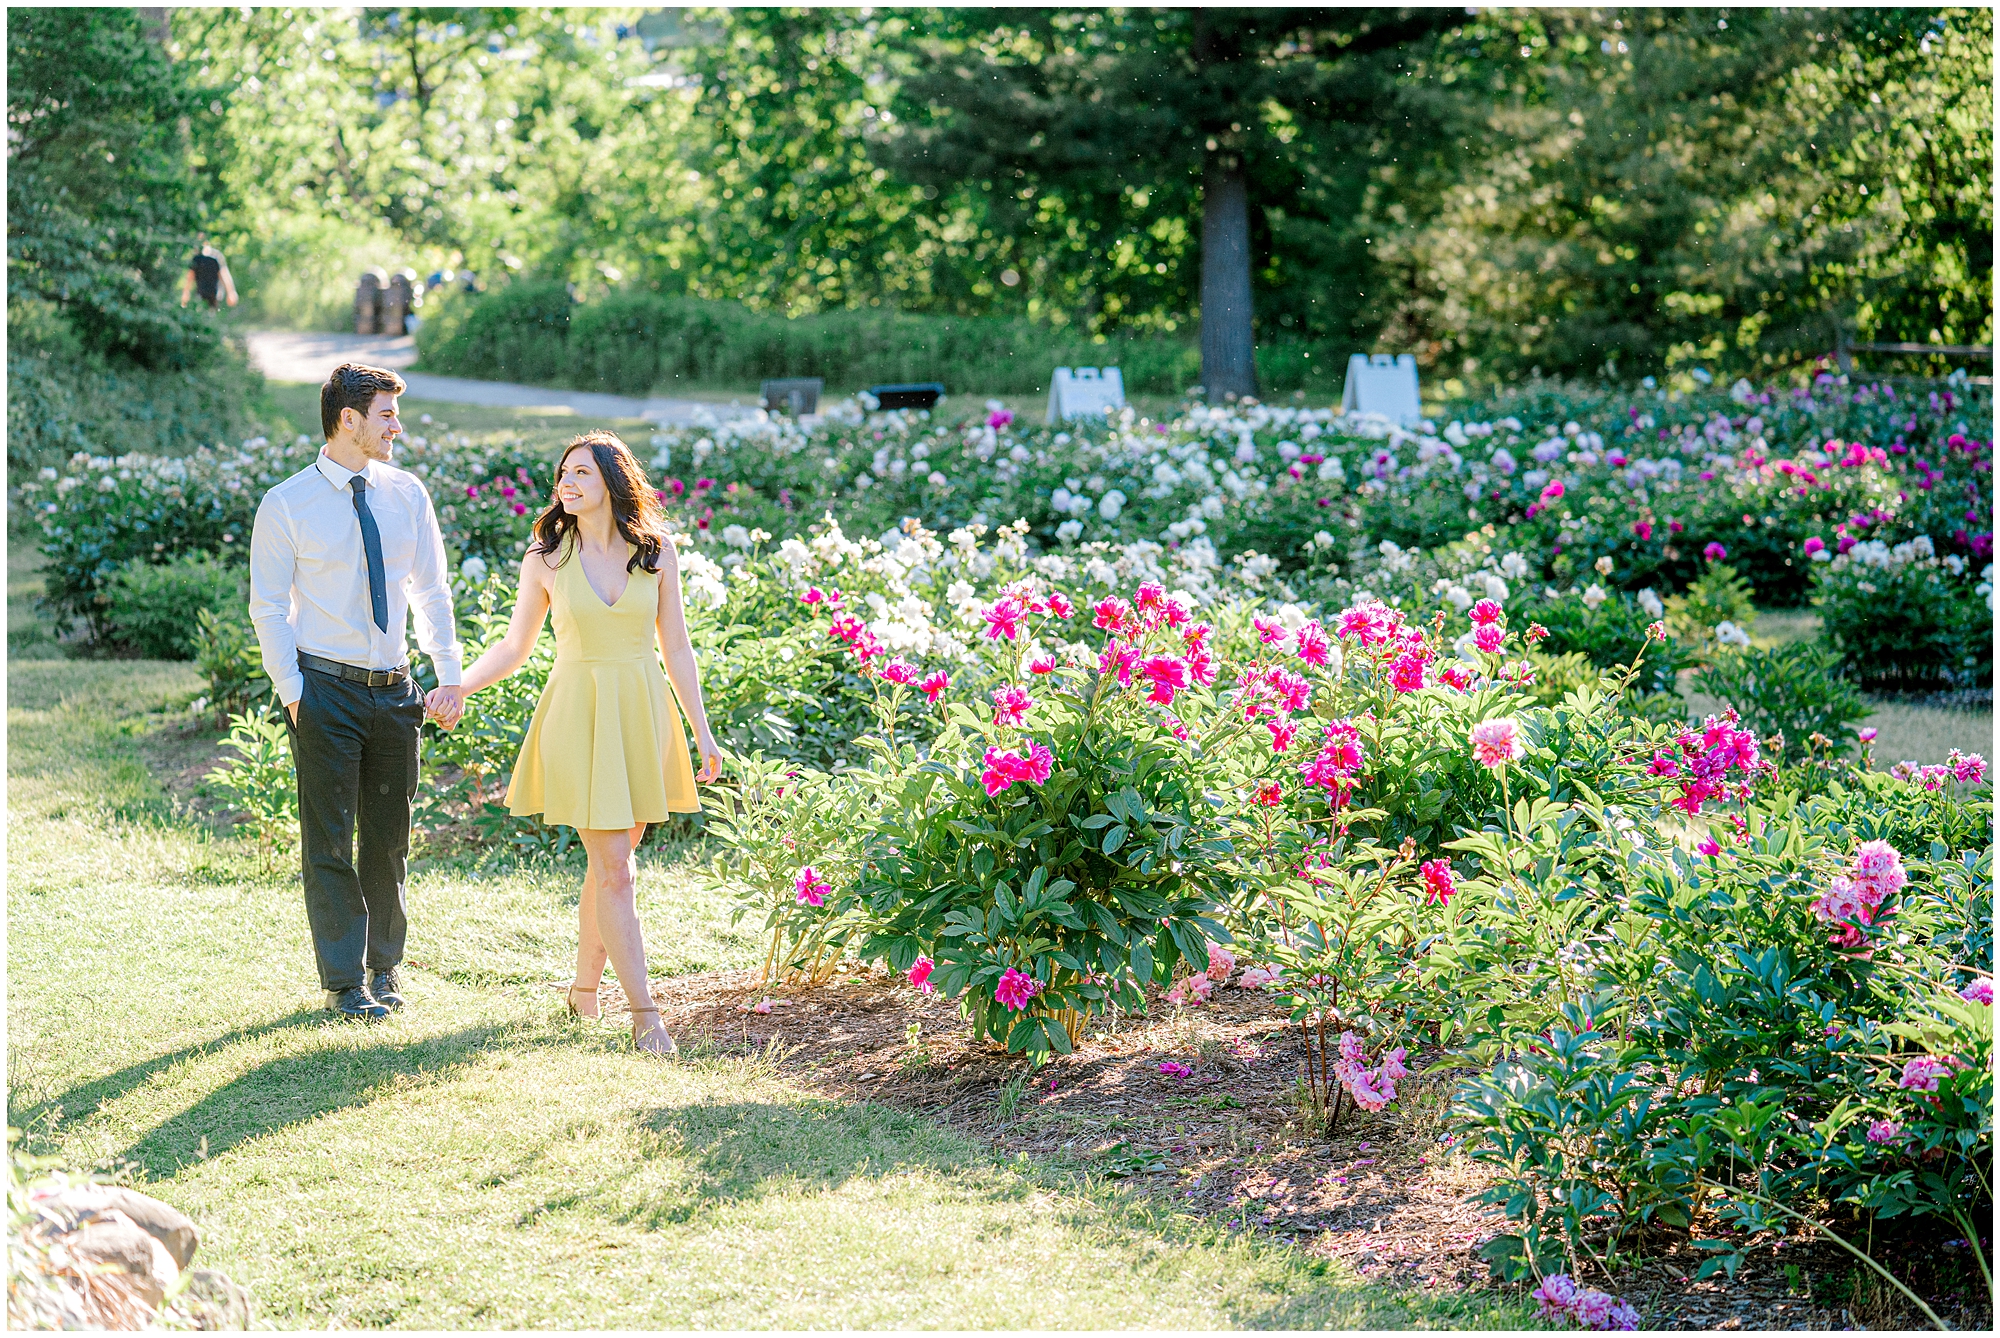 GORGEOUS OUTDOOR ENGAGEMENT PHOTO OUTFIT IDEAS